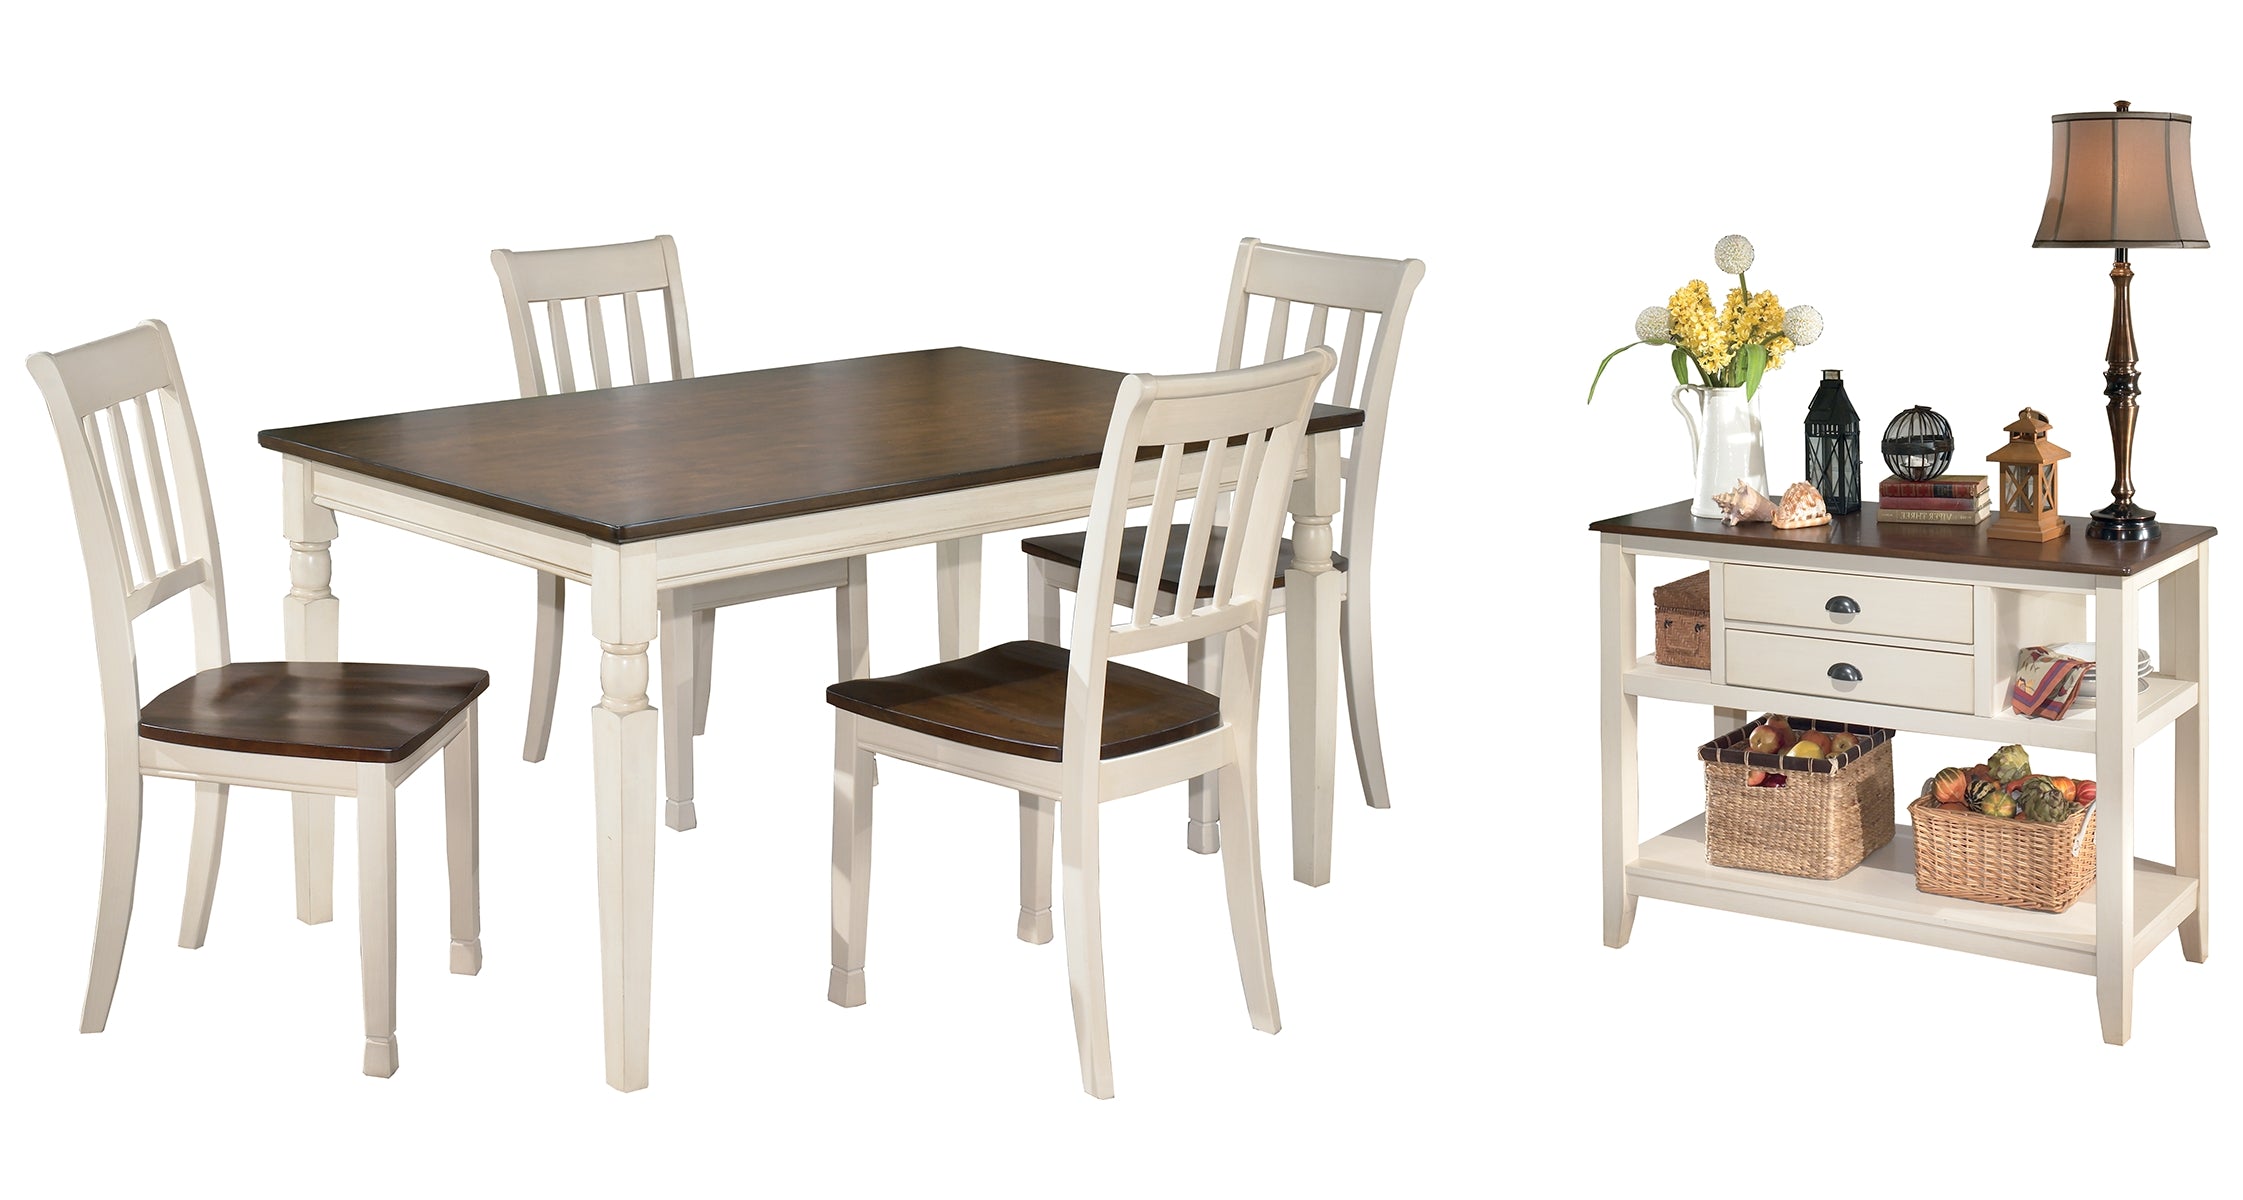 Whitesburg Dining Table and 4 Chairs with Storage